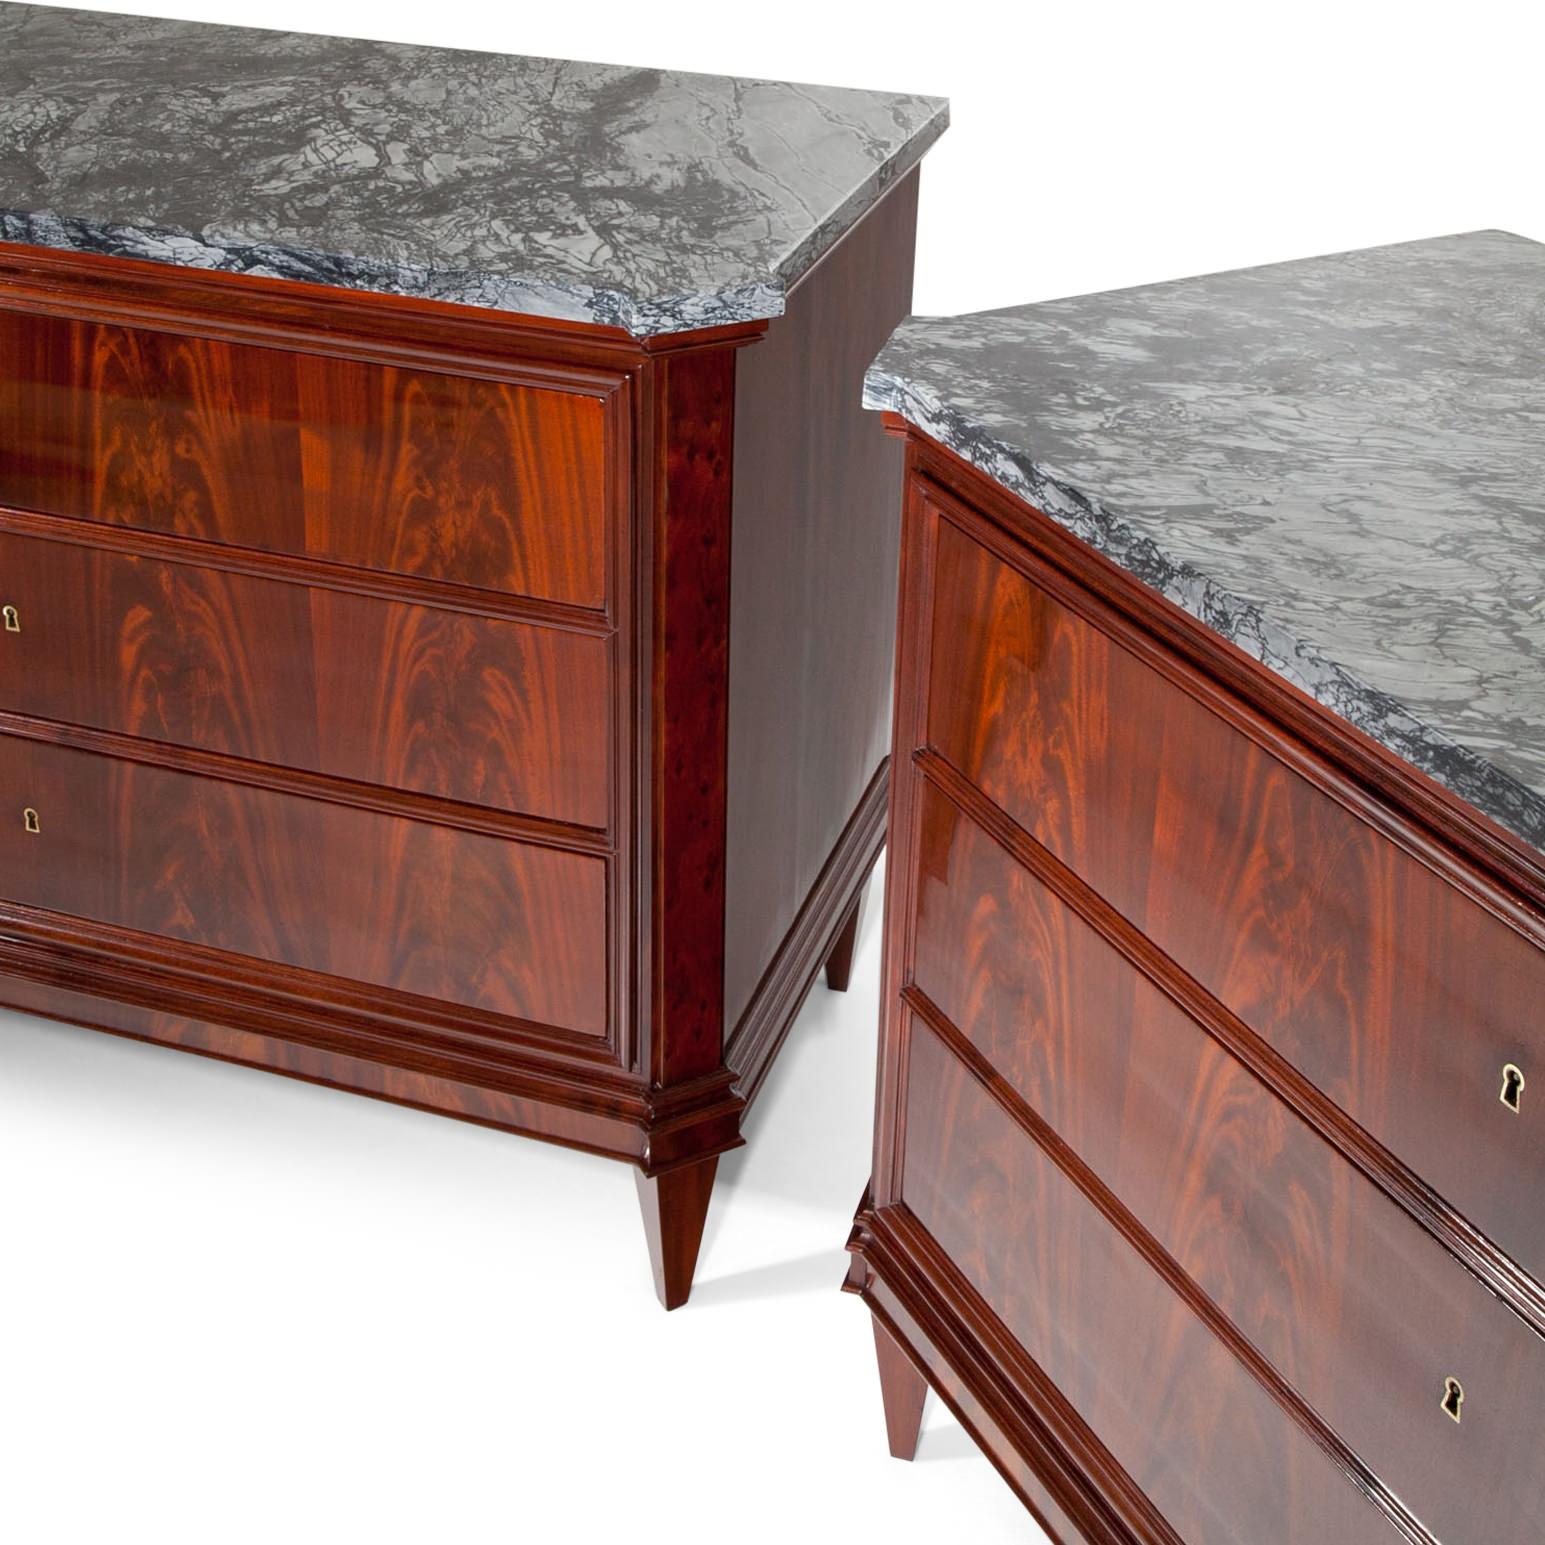 Pair of Italian chests of drawers, standing on tapered feet, with three drawers and a grey-white marble top. The trusses are profiled as are the upper and lower edges. The corners are slanted and accentuated. Very beautiful mahogany veneer pattern.